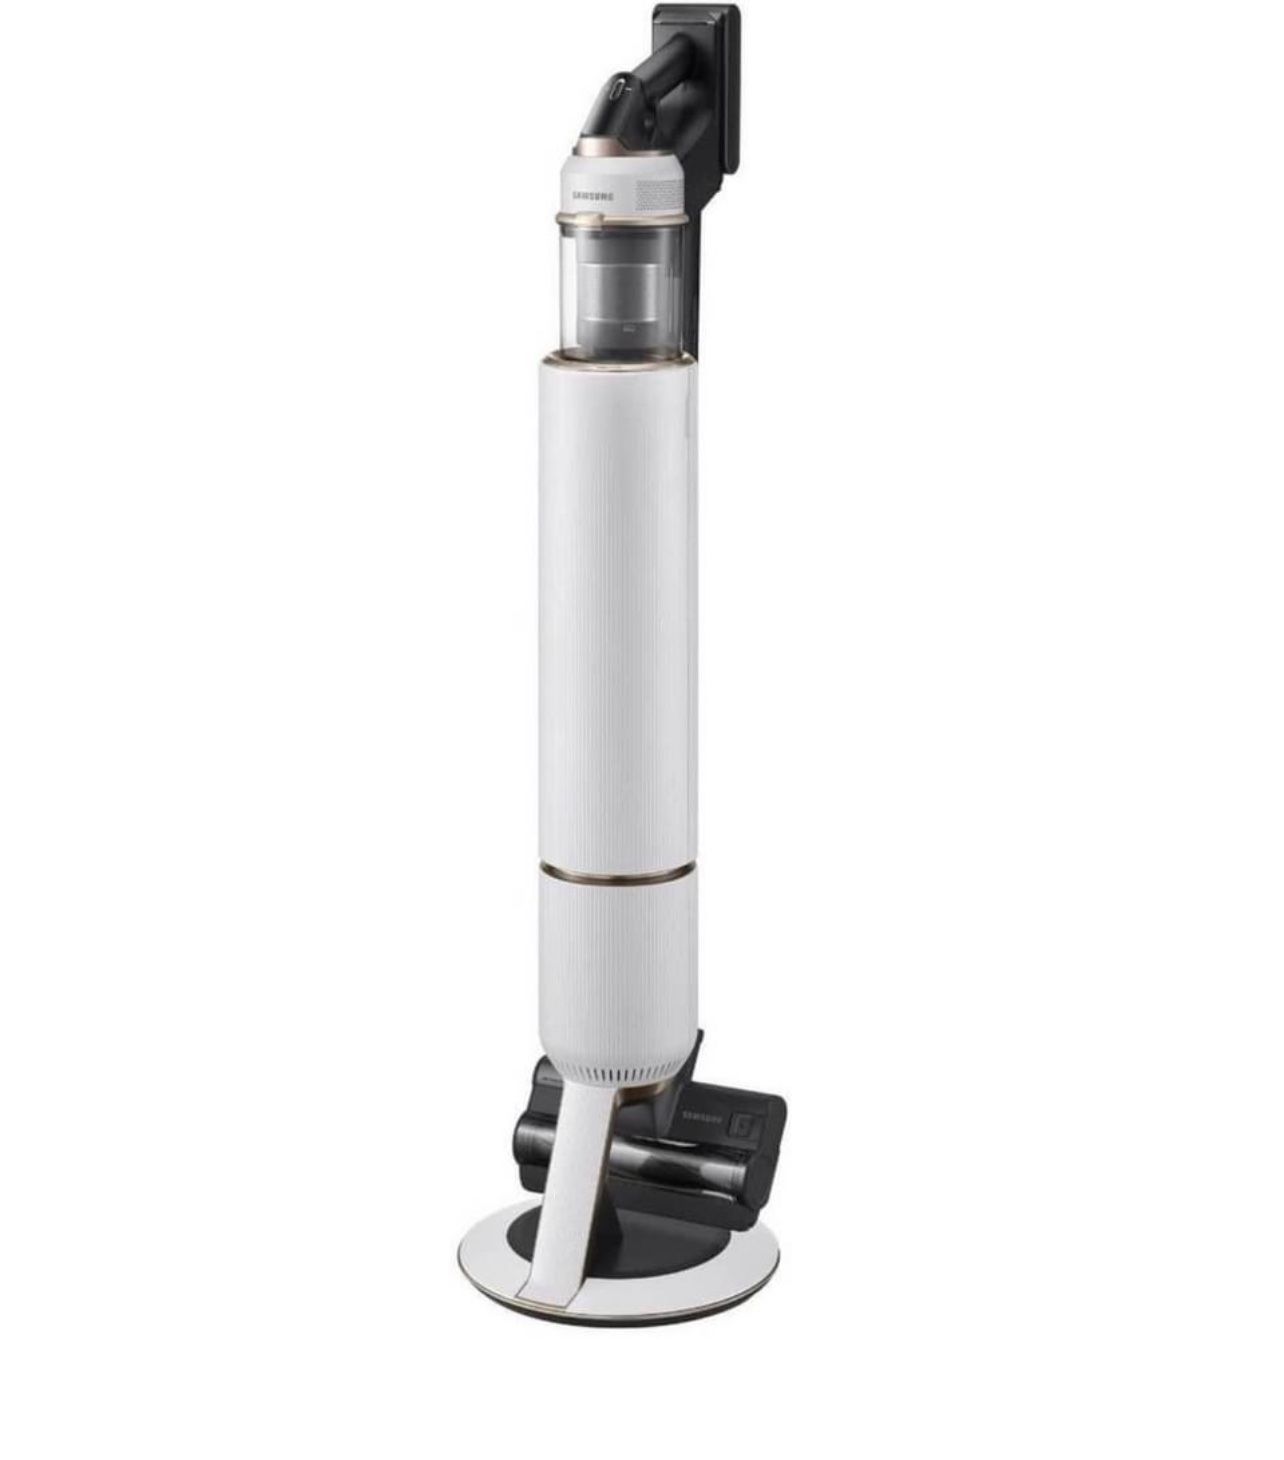 SAMSUNG BESPOKE Jet Cordless Stick Vacuum Cleaner w/ All In One Clean Station, Misty White